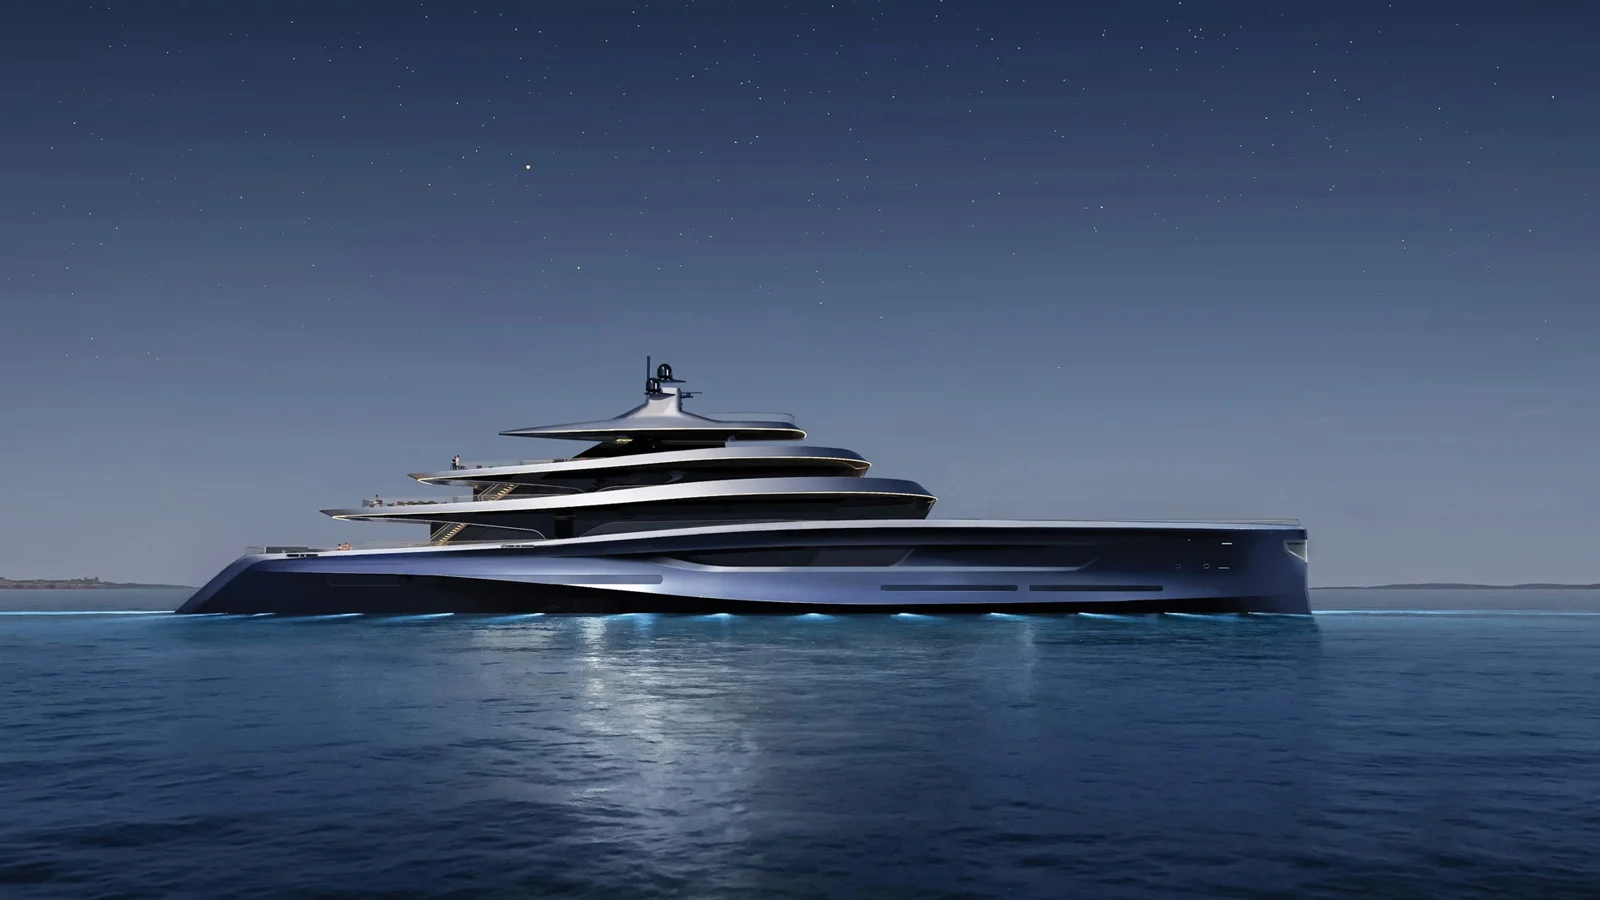 Aeolus 80 by Taylor Design: A transfiguration of an eponymous 131-metre yacht and “a reference to the romance of the ocean as epitomized by the J Class sailing yachts of the last century”